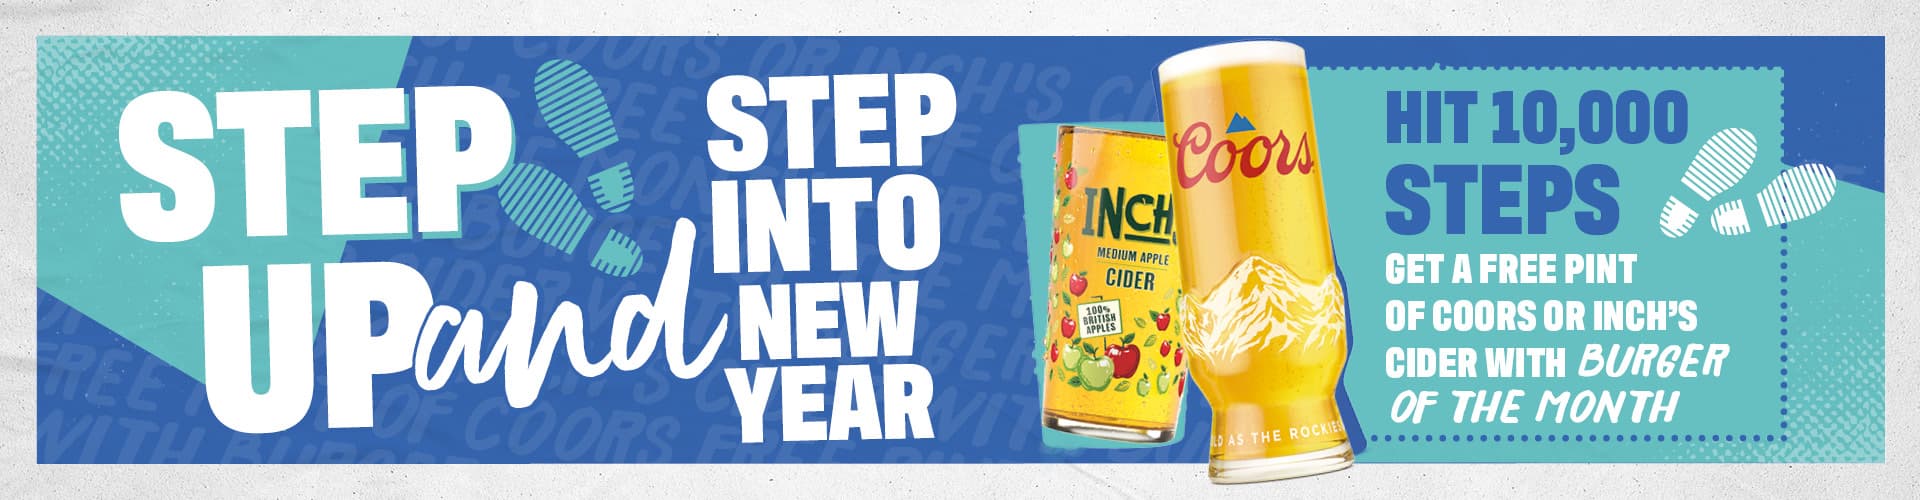 Step up and step into new year! Hit 10,000 steps and get a free pint with our burger of the month!